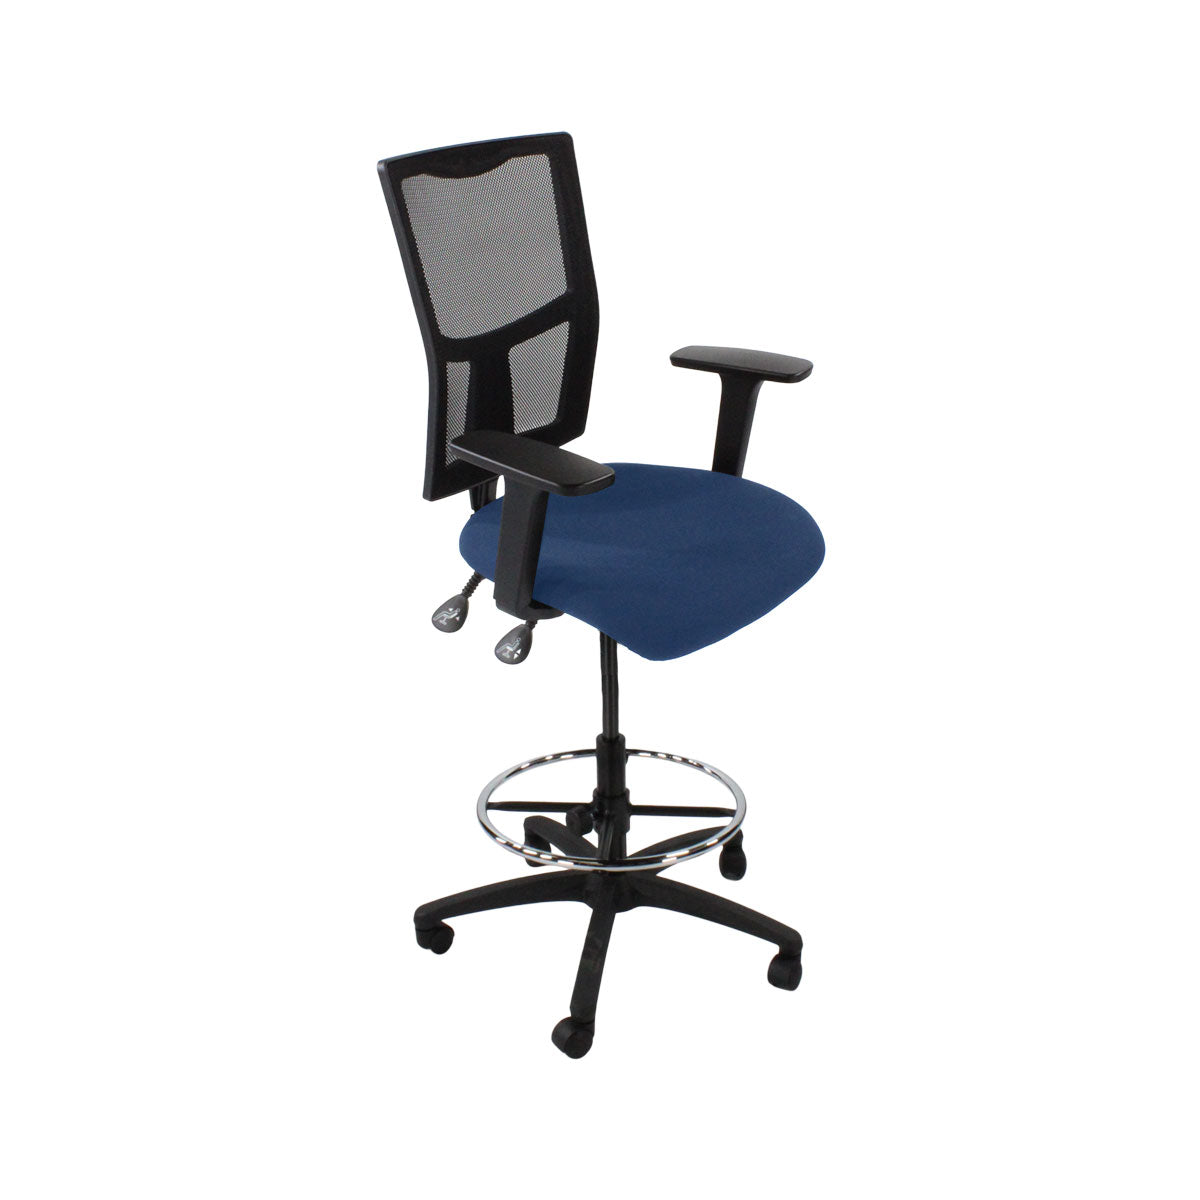 TOC: Ergo 2 Draughtsman Chair in Blue Fabric - Refurbished